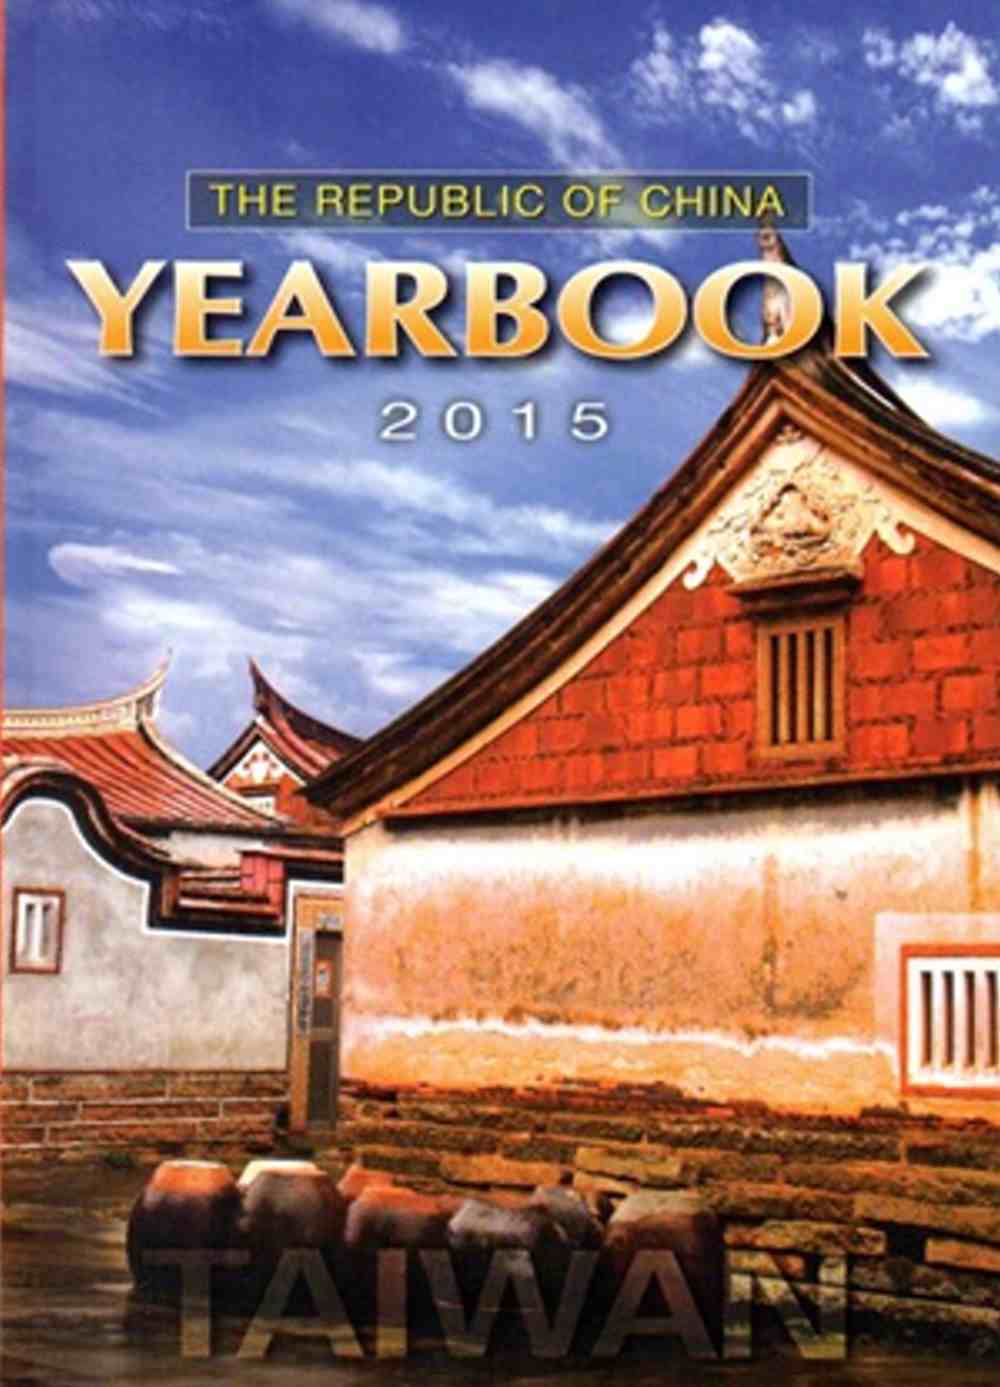 The Republic of China Yearbook...